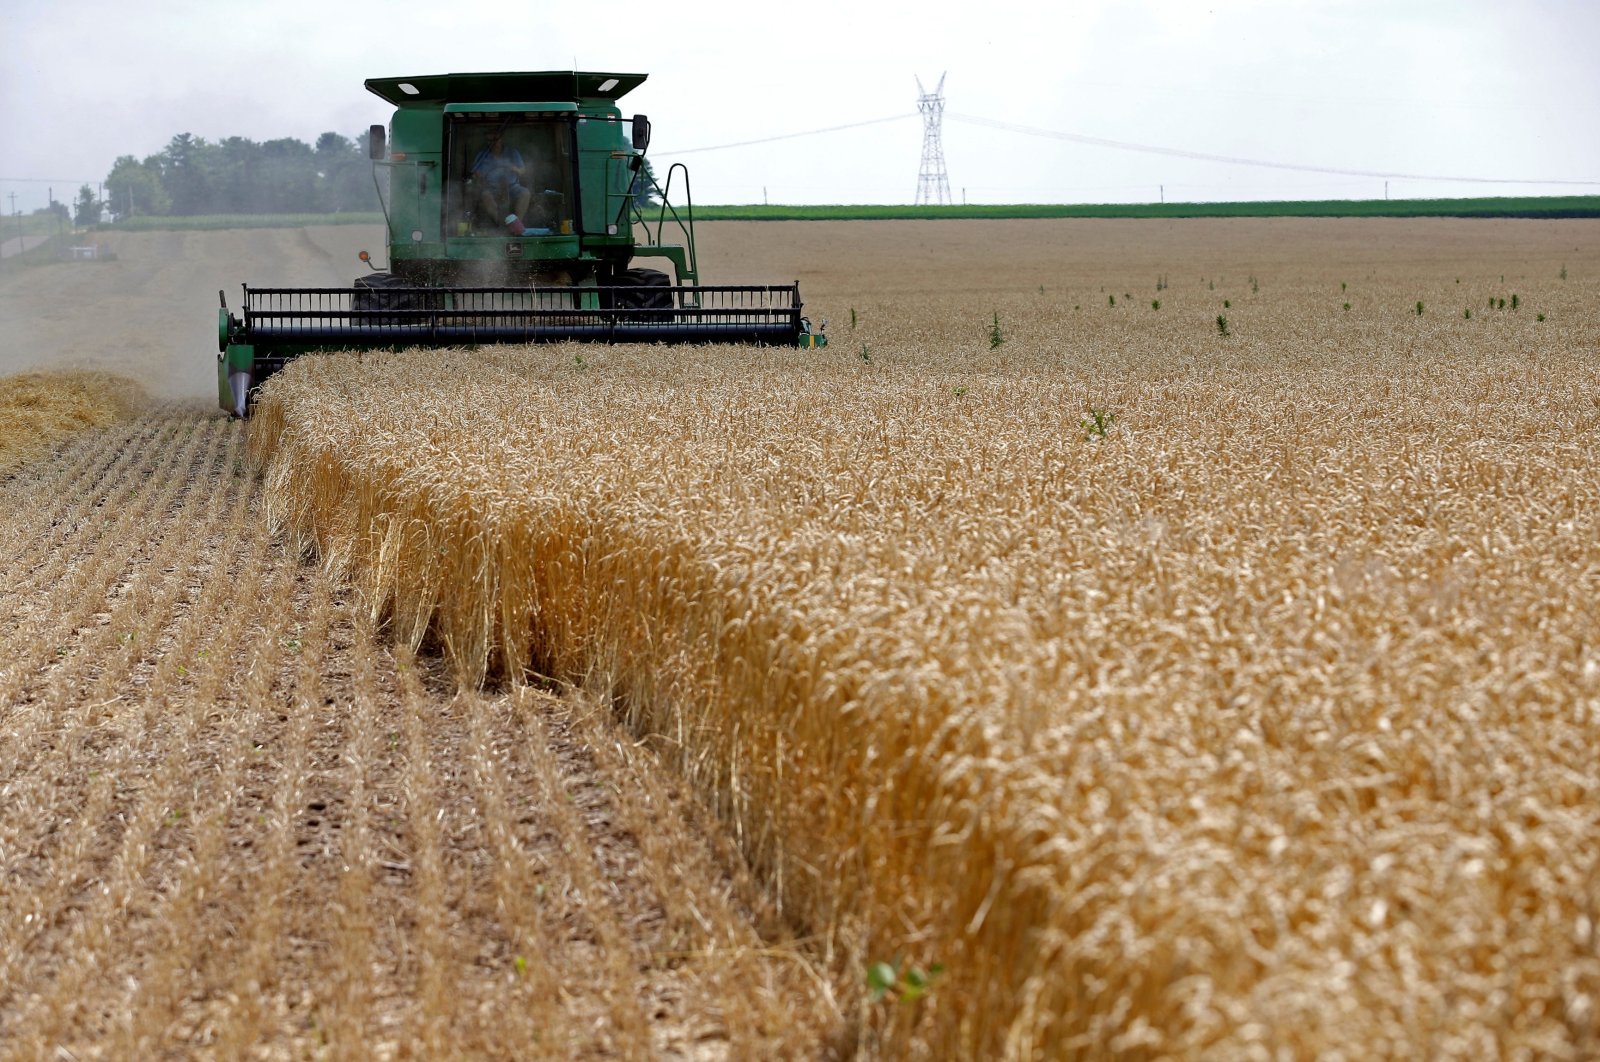  A combine drives over stalks of soft red winter wheat during the harvest on a farm in Dixon, Illinois, July 16, 2013. (Reuters Photo)